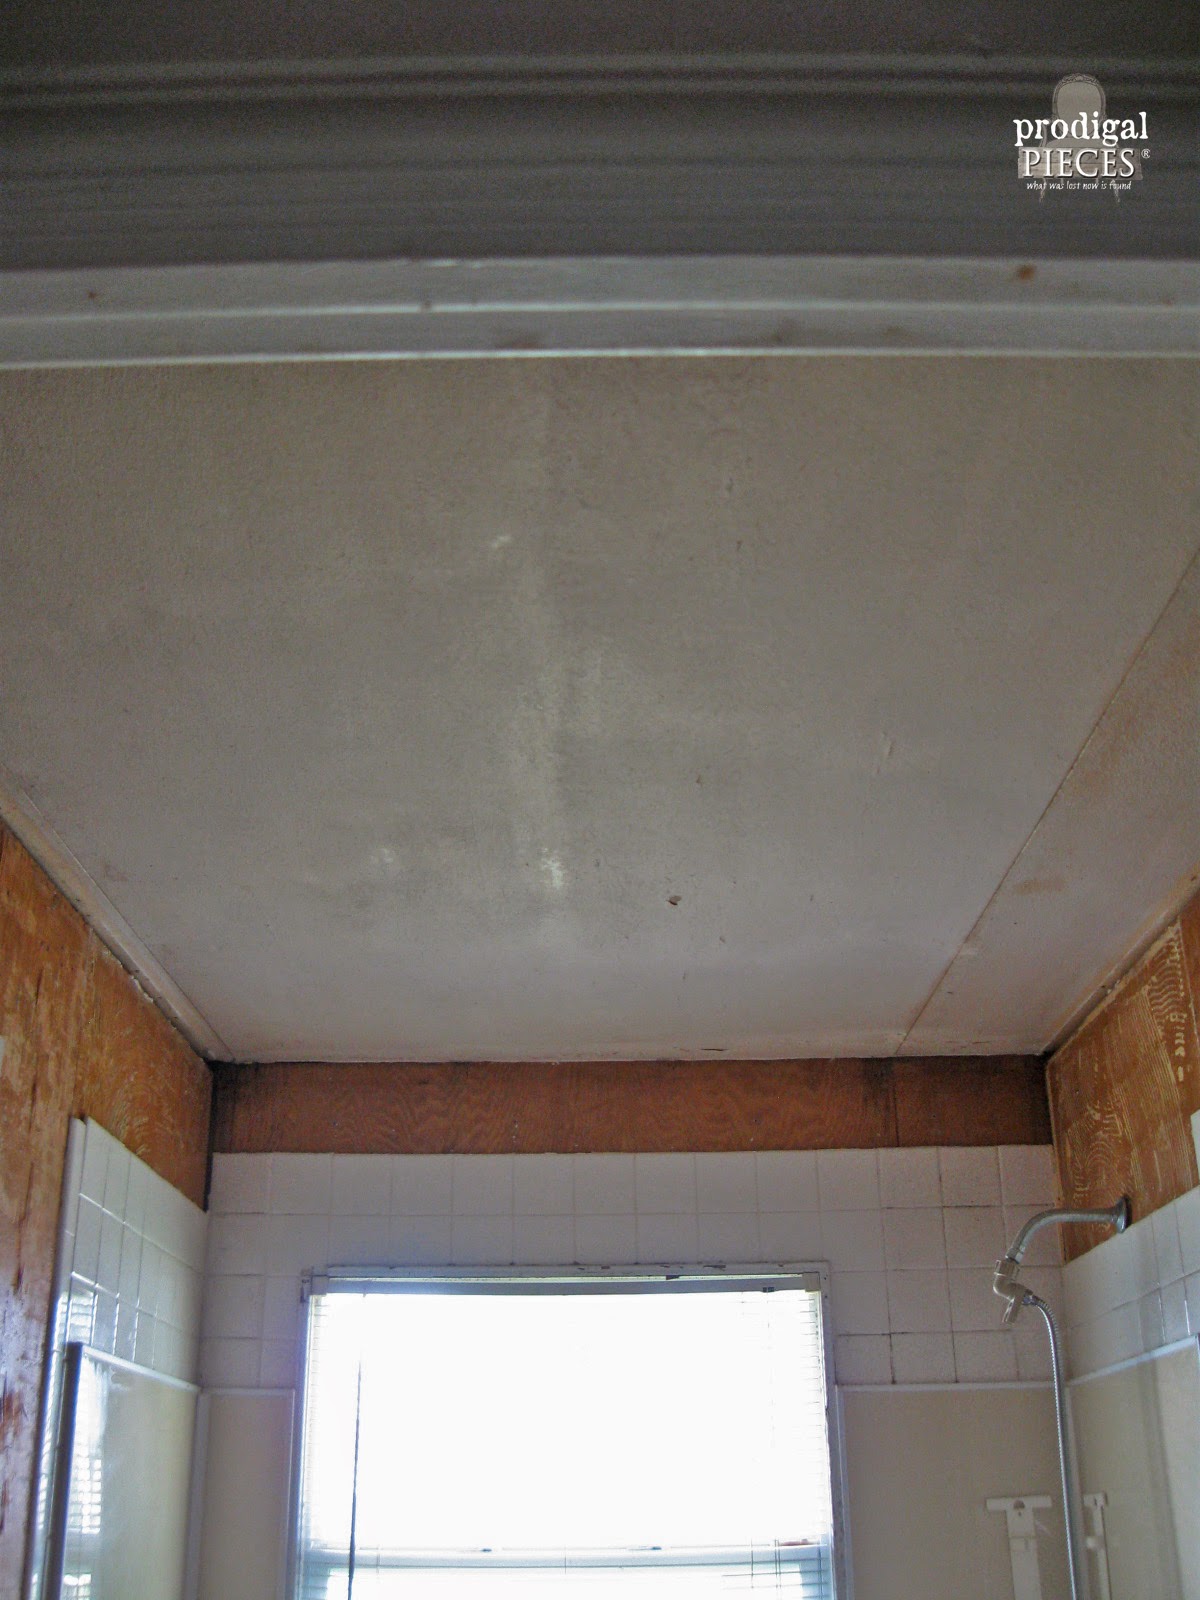 Ceiling Before in Bathroom Makeover by Prodigal Pieces | prodigalpieces.com